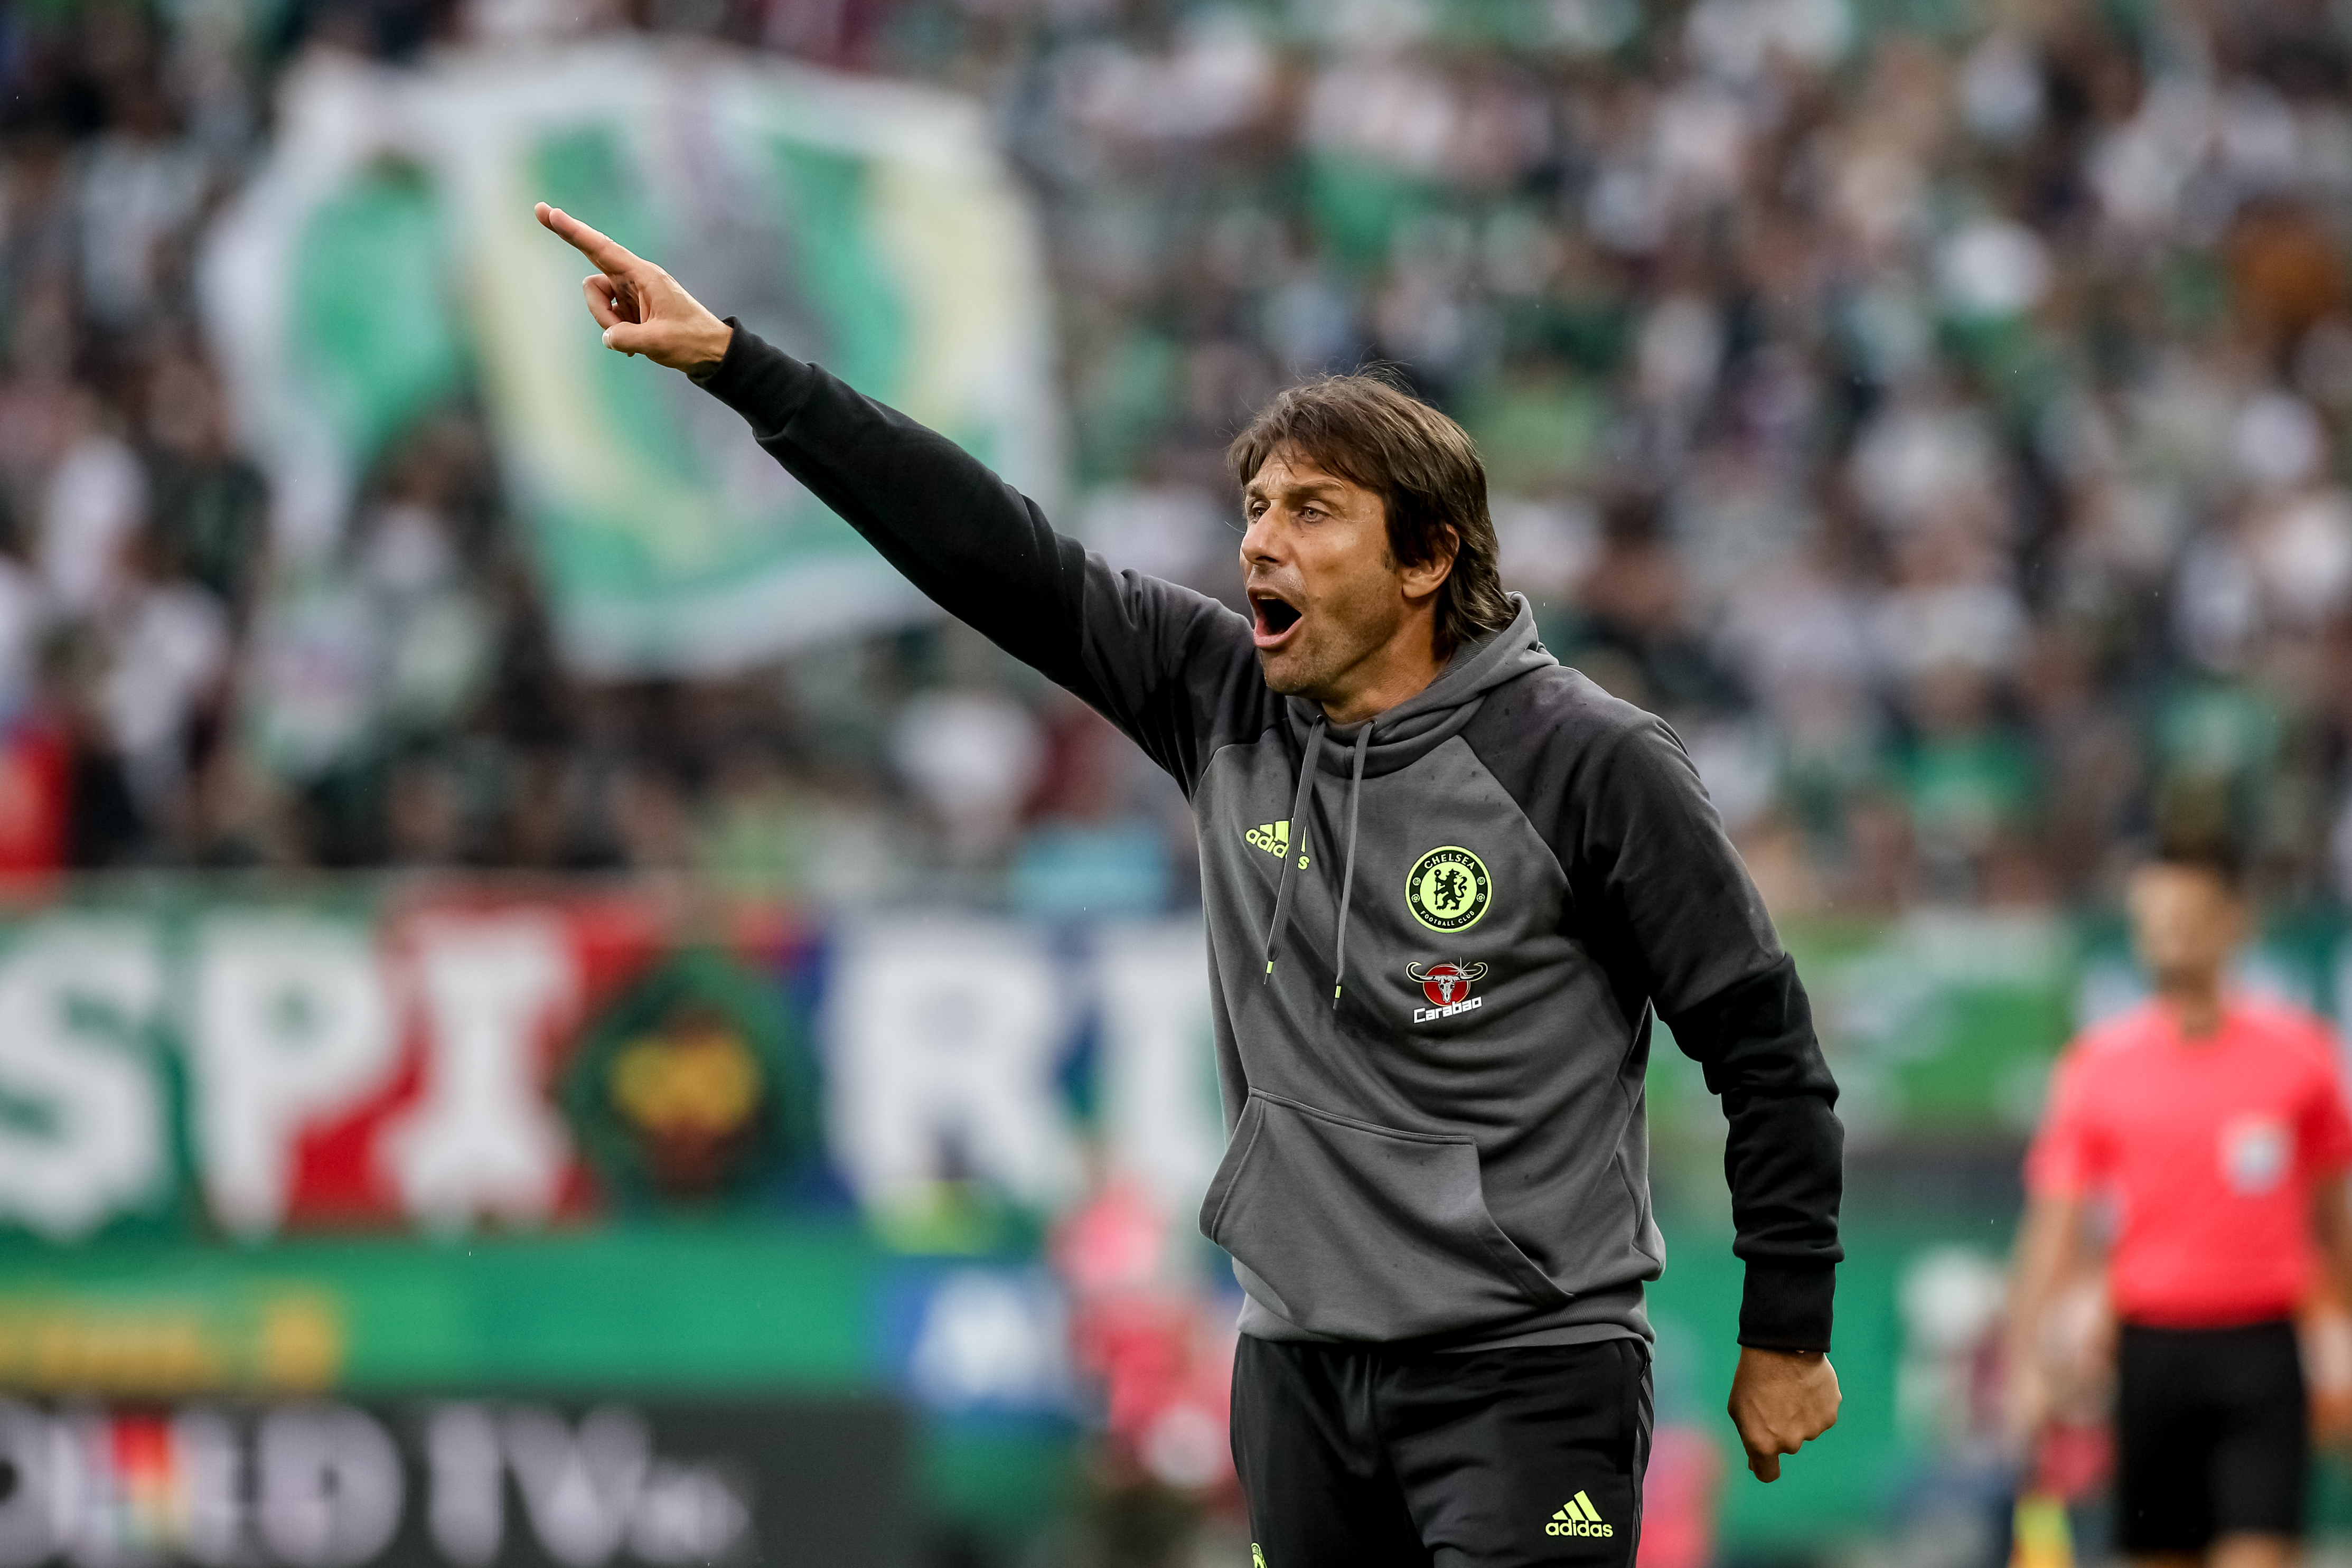 VIENNA, AUSTRIA - JULY 16:  Head coach of Chelsea Antonio Conte gestures during an friendly match between SK Rapid Vienna and Chelsea F.C. at Allianz Stadion on July 16, 2016 in Vienna, Austria.  (Photo by Matej Divizna/Getty Images)